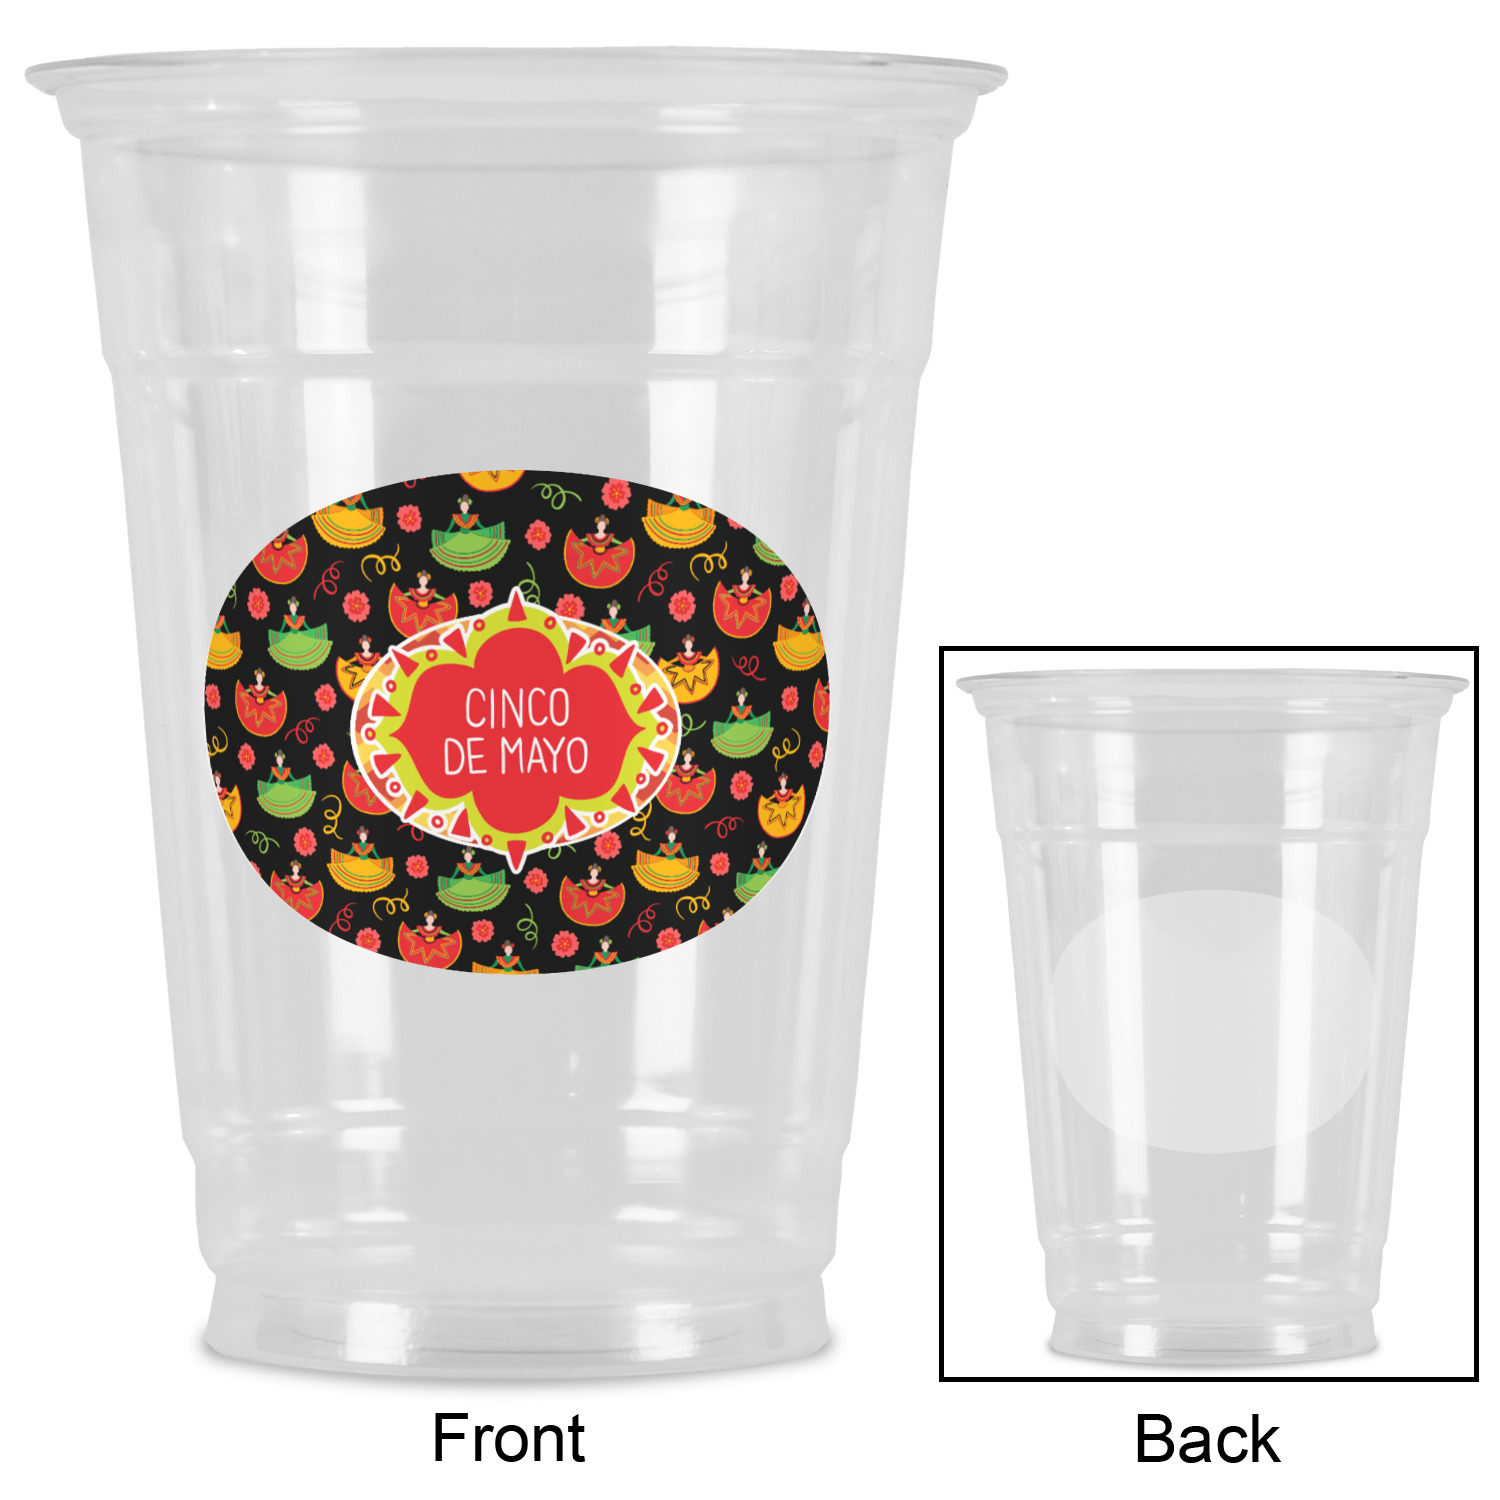 https://www.youcustomizeit.com/common/MAKE/1561412/Cinco-De-Mayo-Party-Cups-16oz-Approval.jpg?lm=1671150408